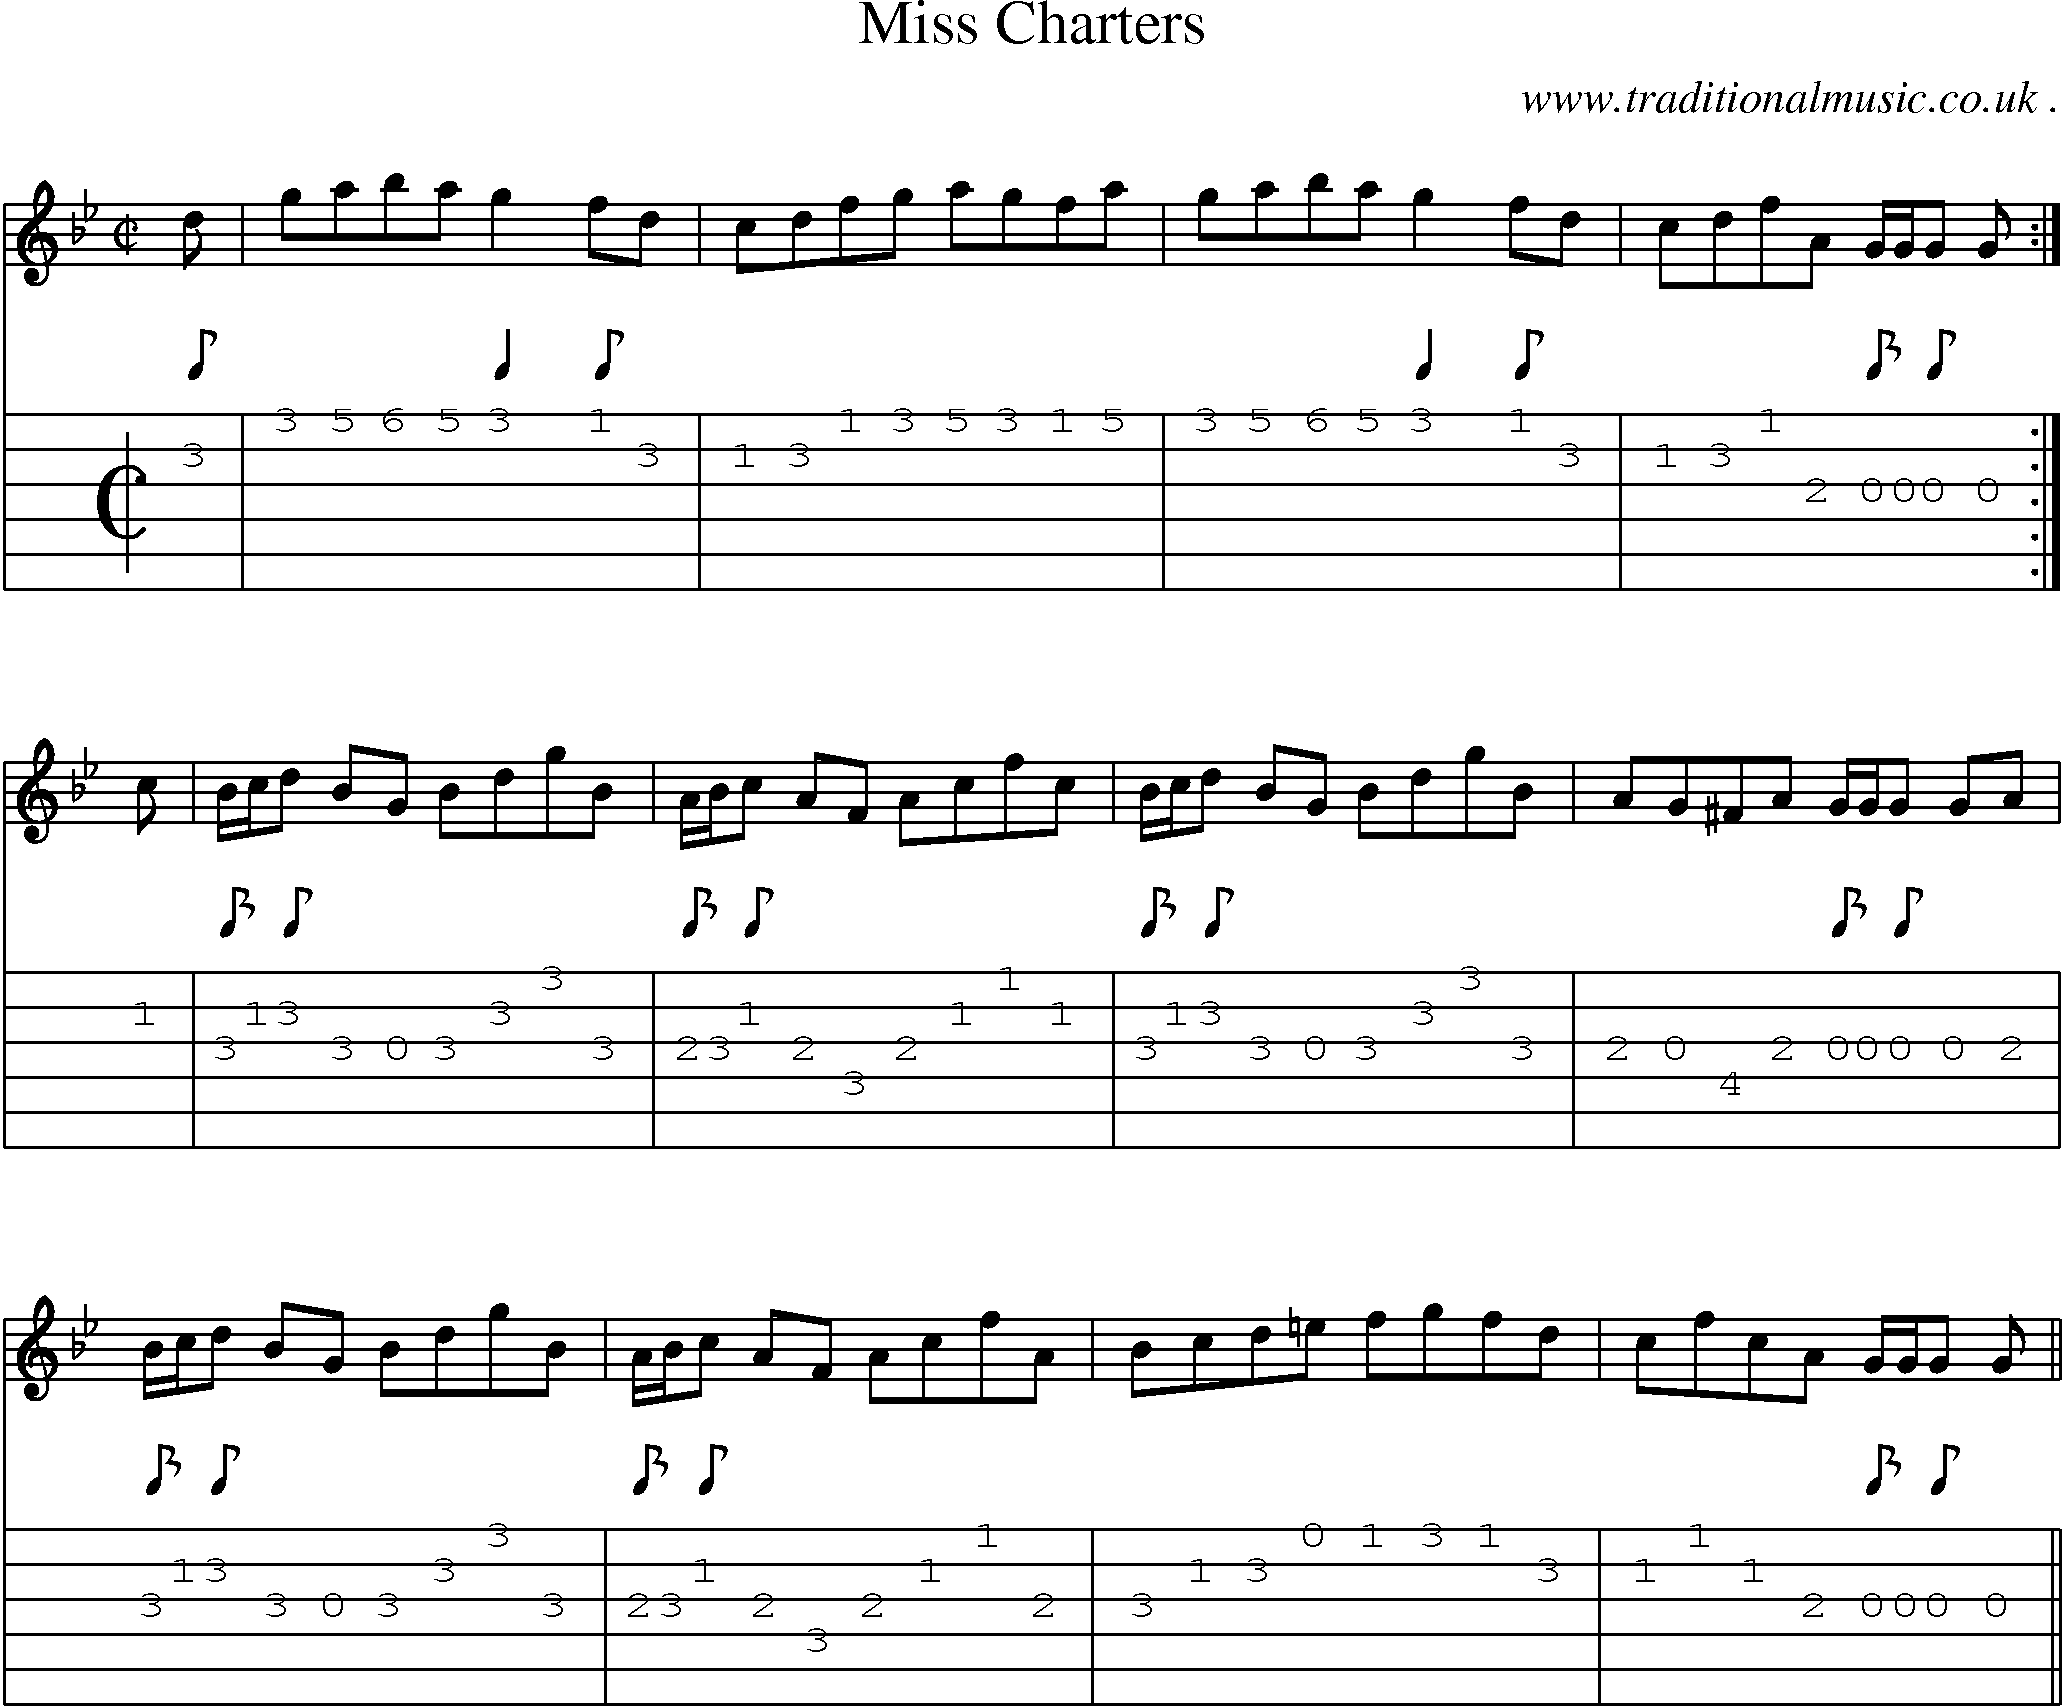 Sheet-music  score, Chords and Guitar Tabs for Miss Charters